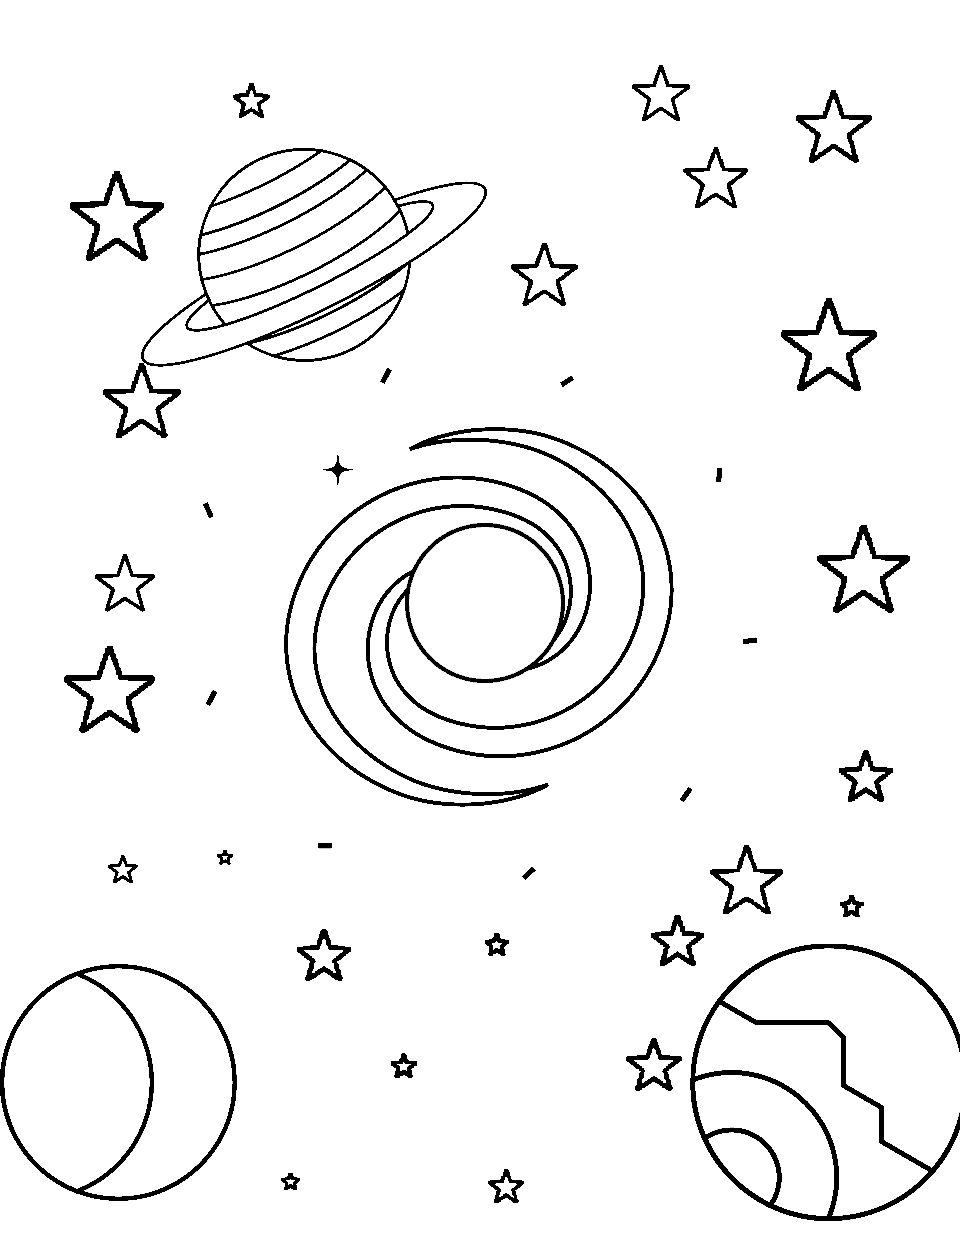 Outer Space Coloring Book: Space Coloring Book For Kids Ages 8-12, 7-9,  4-8, 3-5, And Toddlers 2-4 Years Old. 100 Coloring Pages With Planets, As  (Paperback)